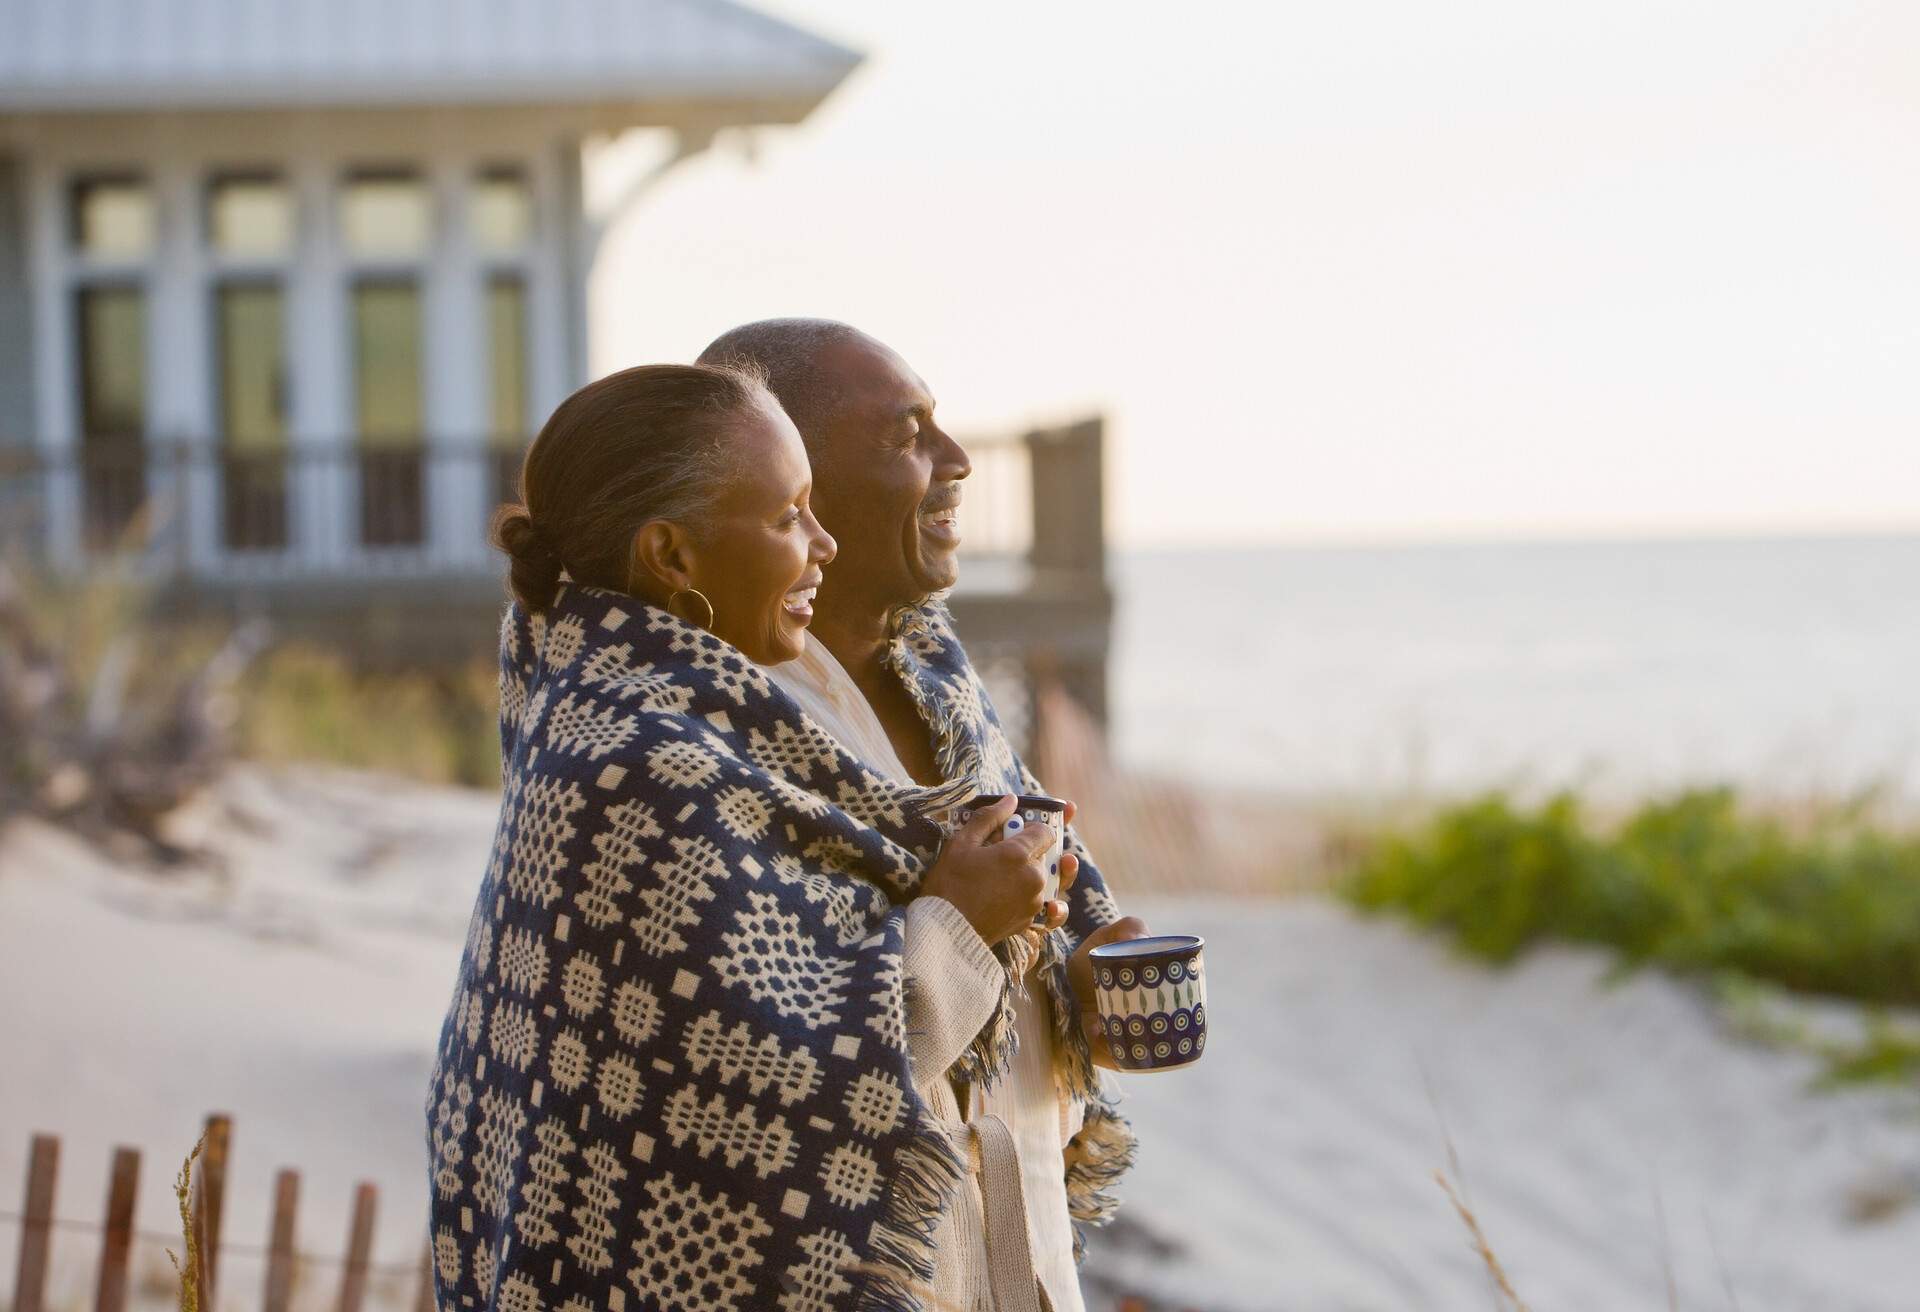 An elderly couple wrapped themselves with a knitted shawl as they smile on a beach.